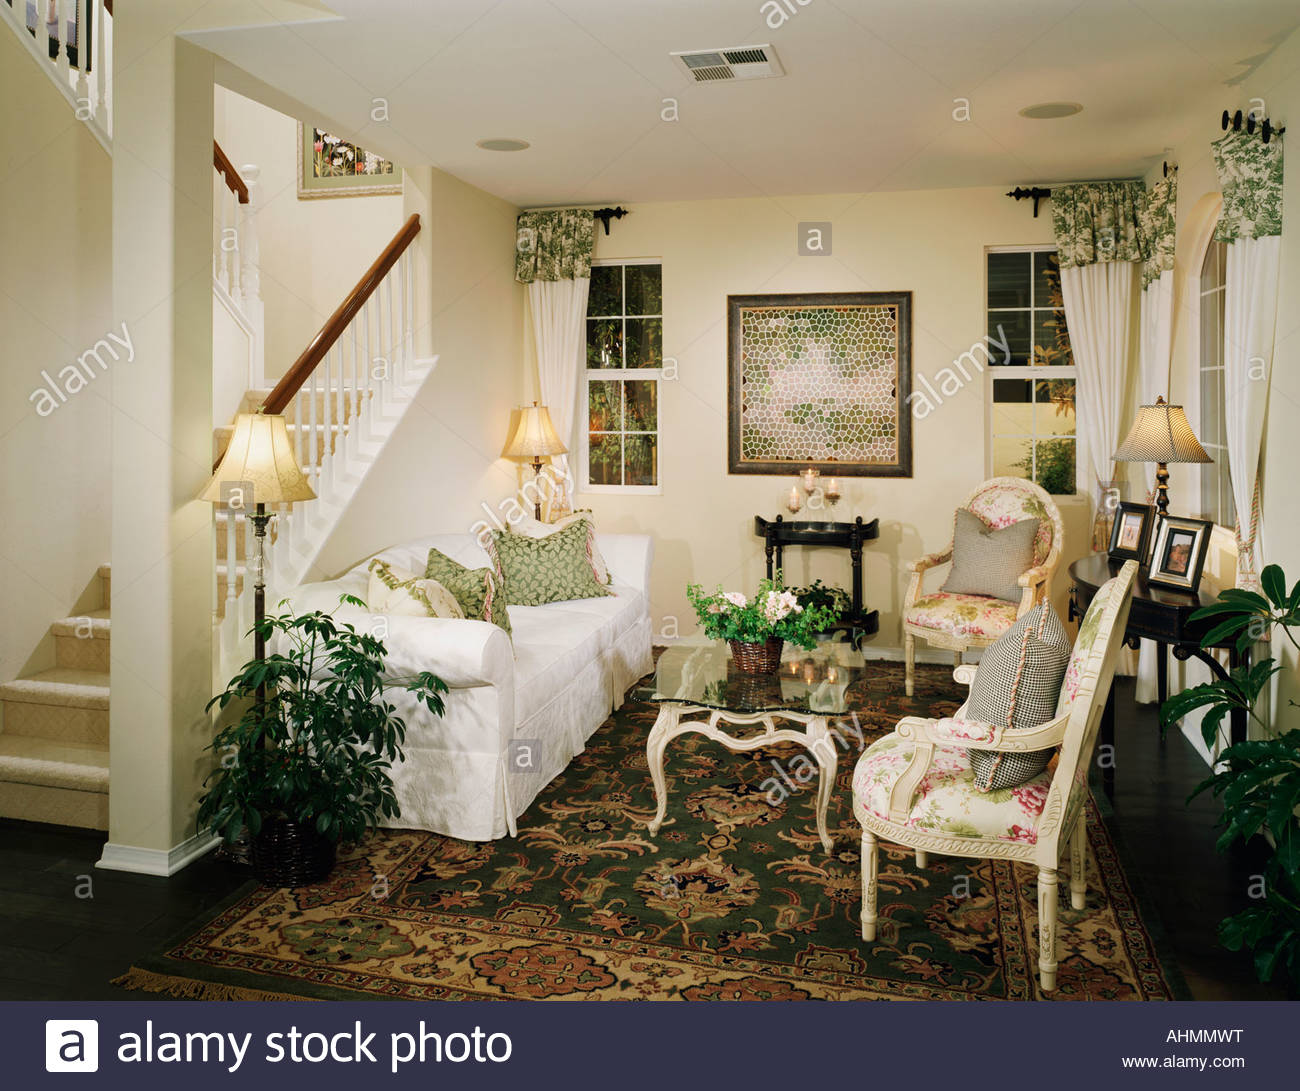 Cozy Sitting Room With An Old Fashioned Style Stock Photo Royalty